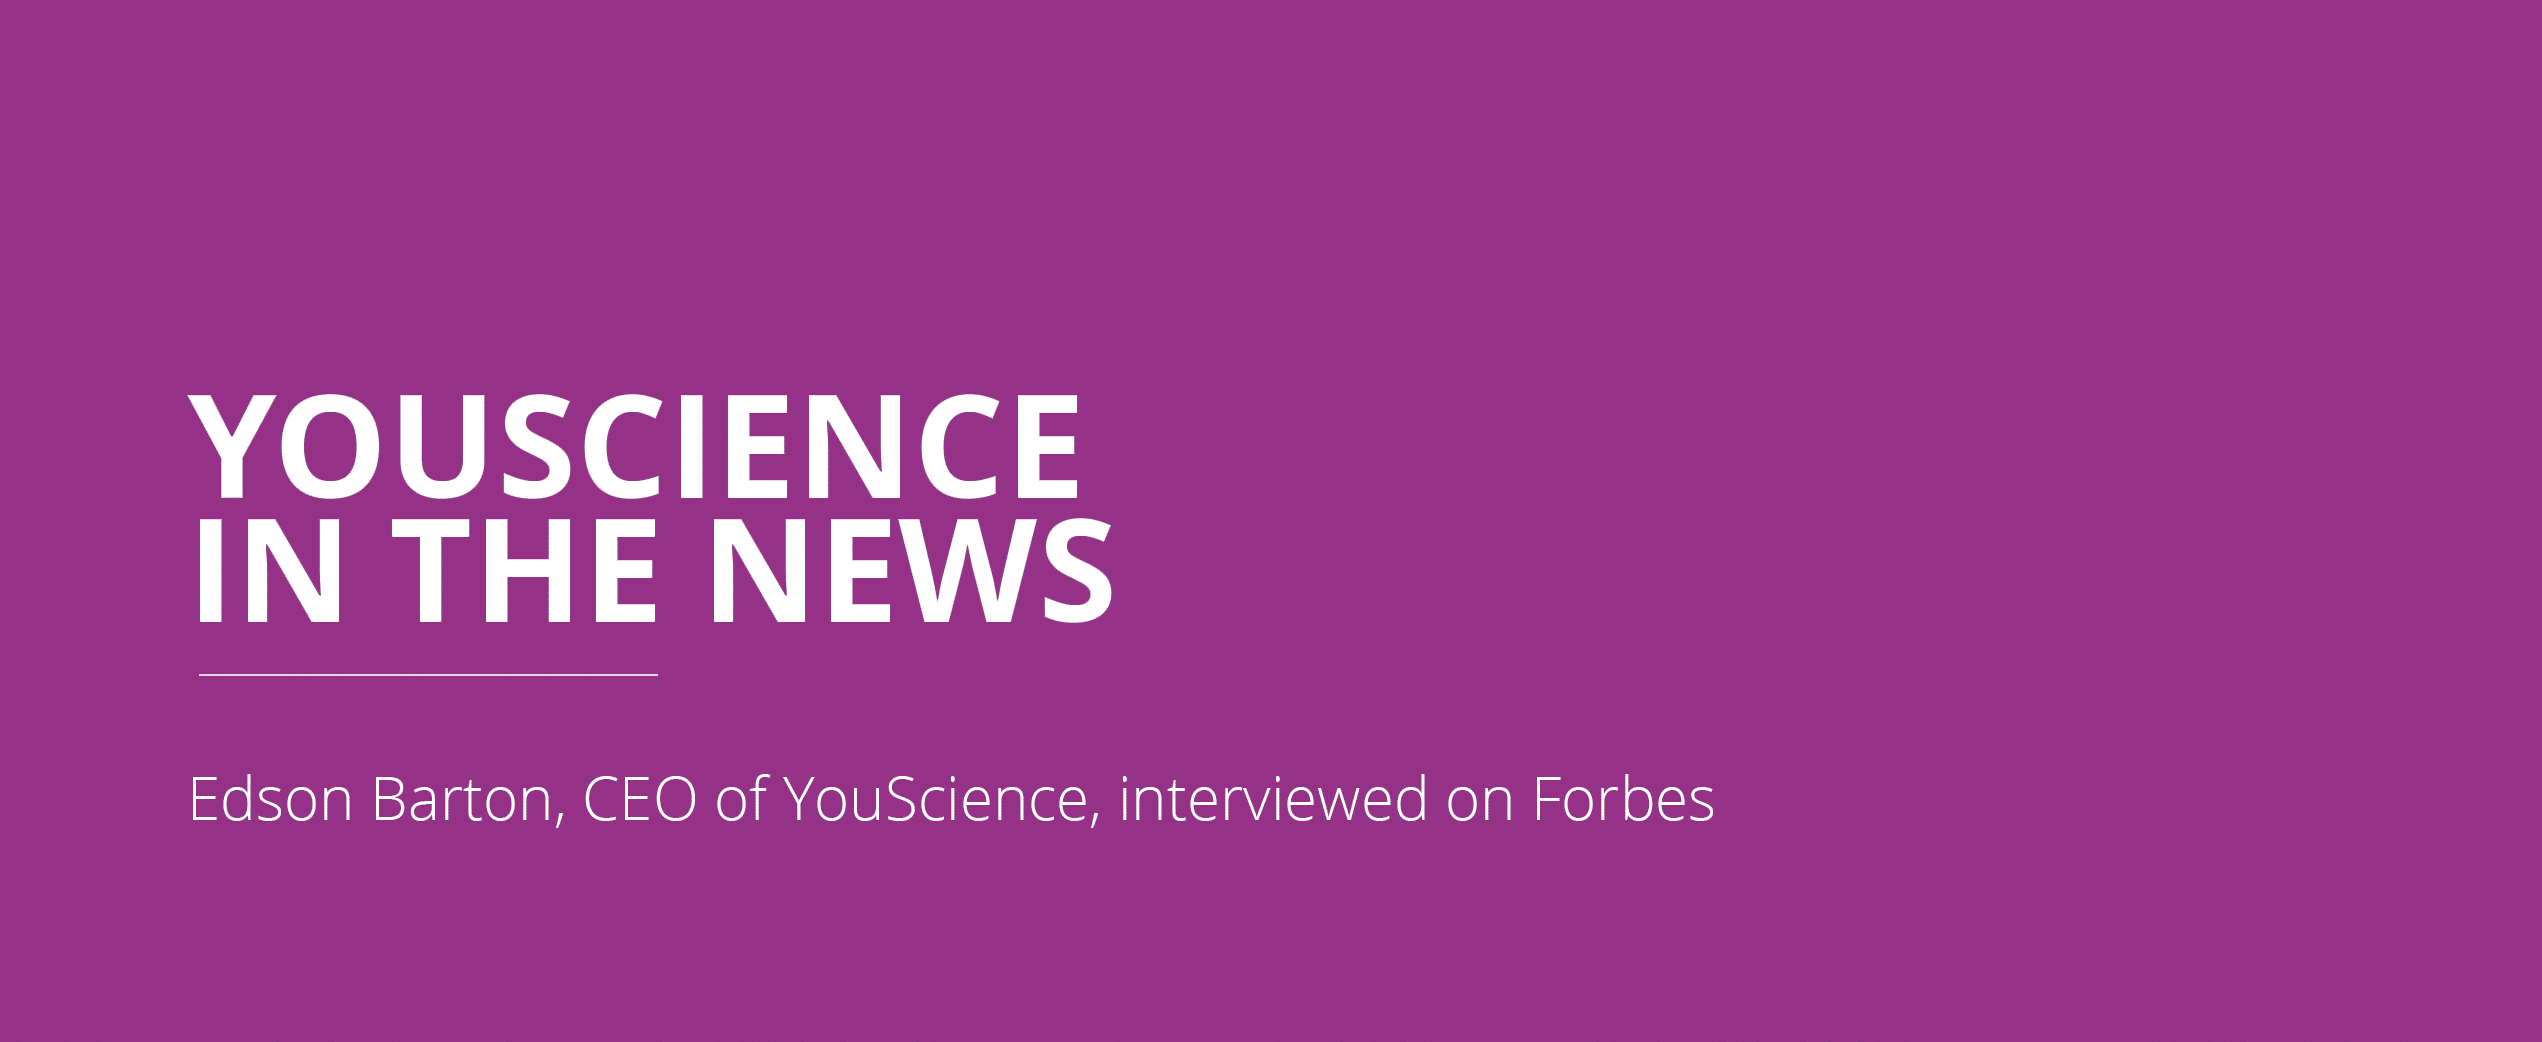 Edson Barton, CEO of YouScience, interviewed on Forbes